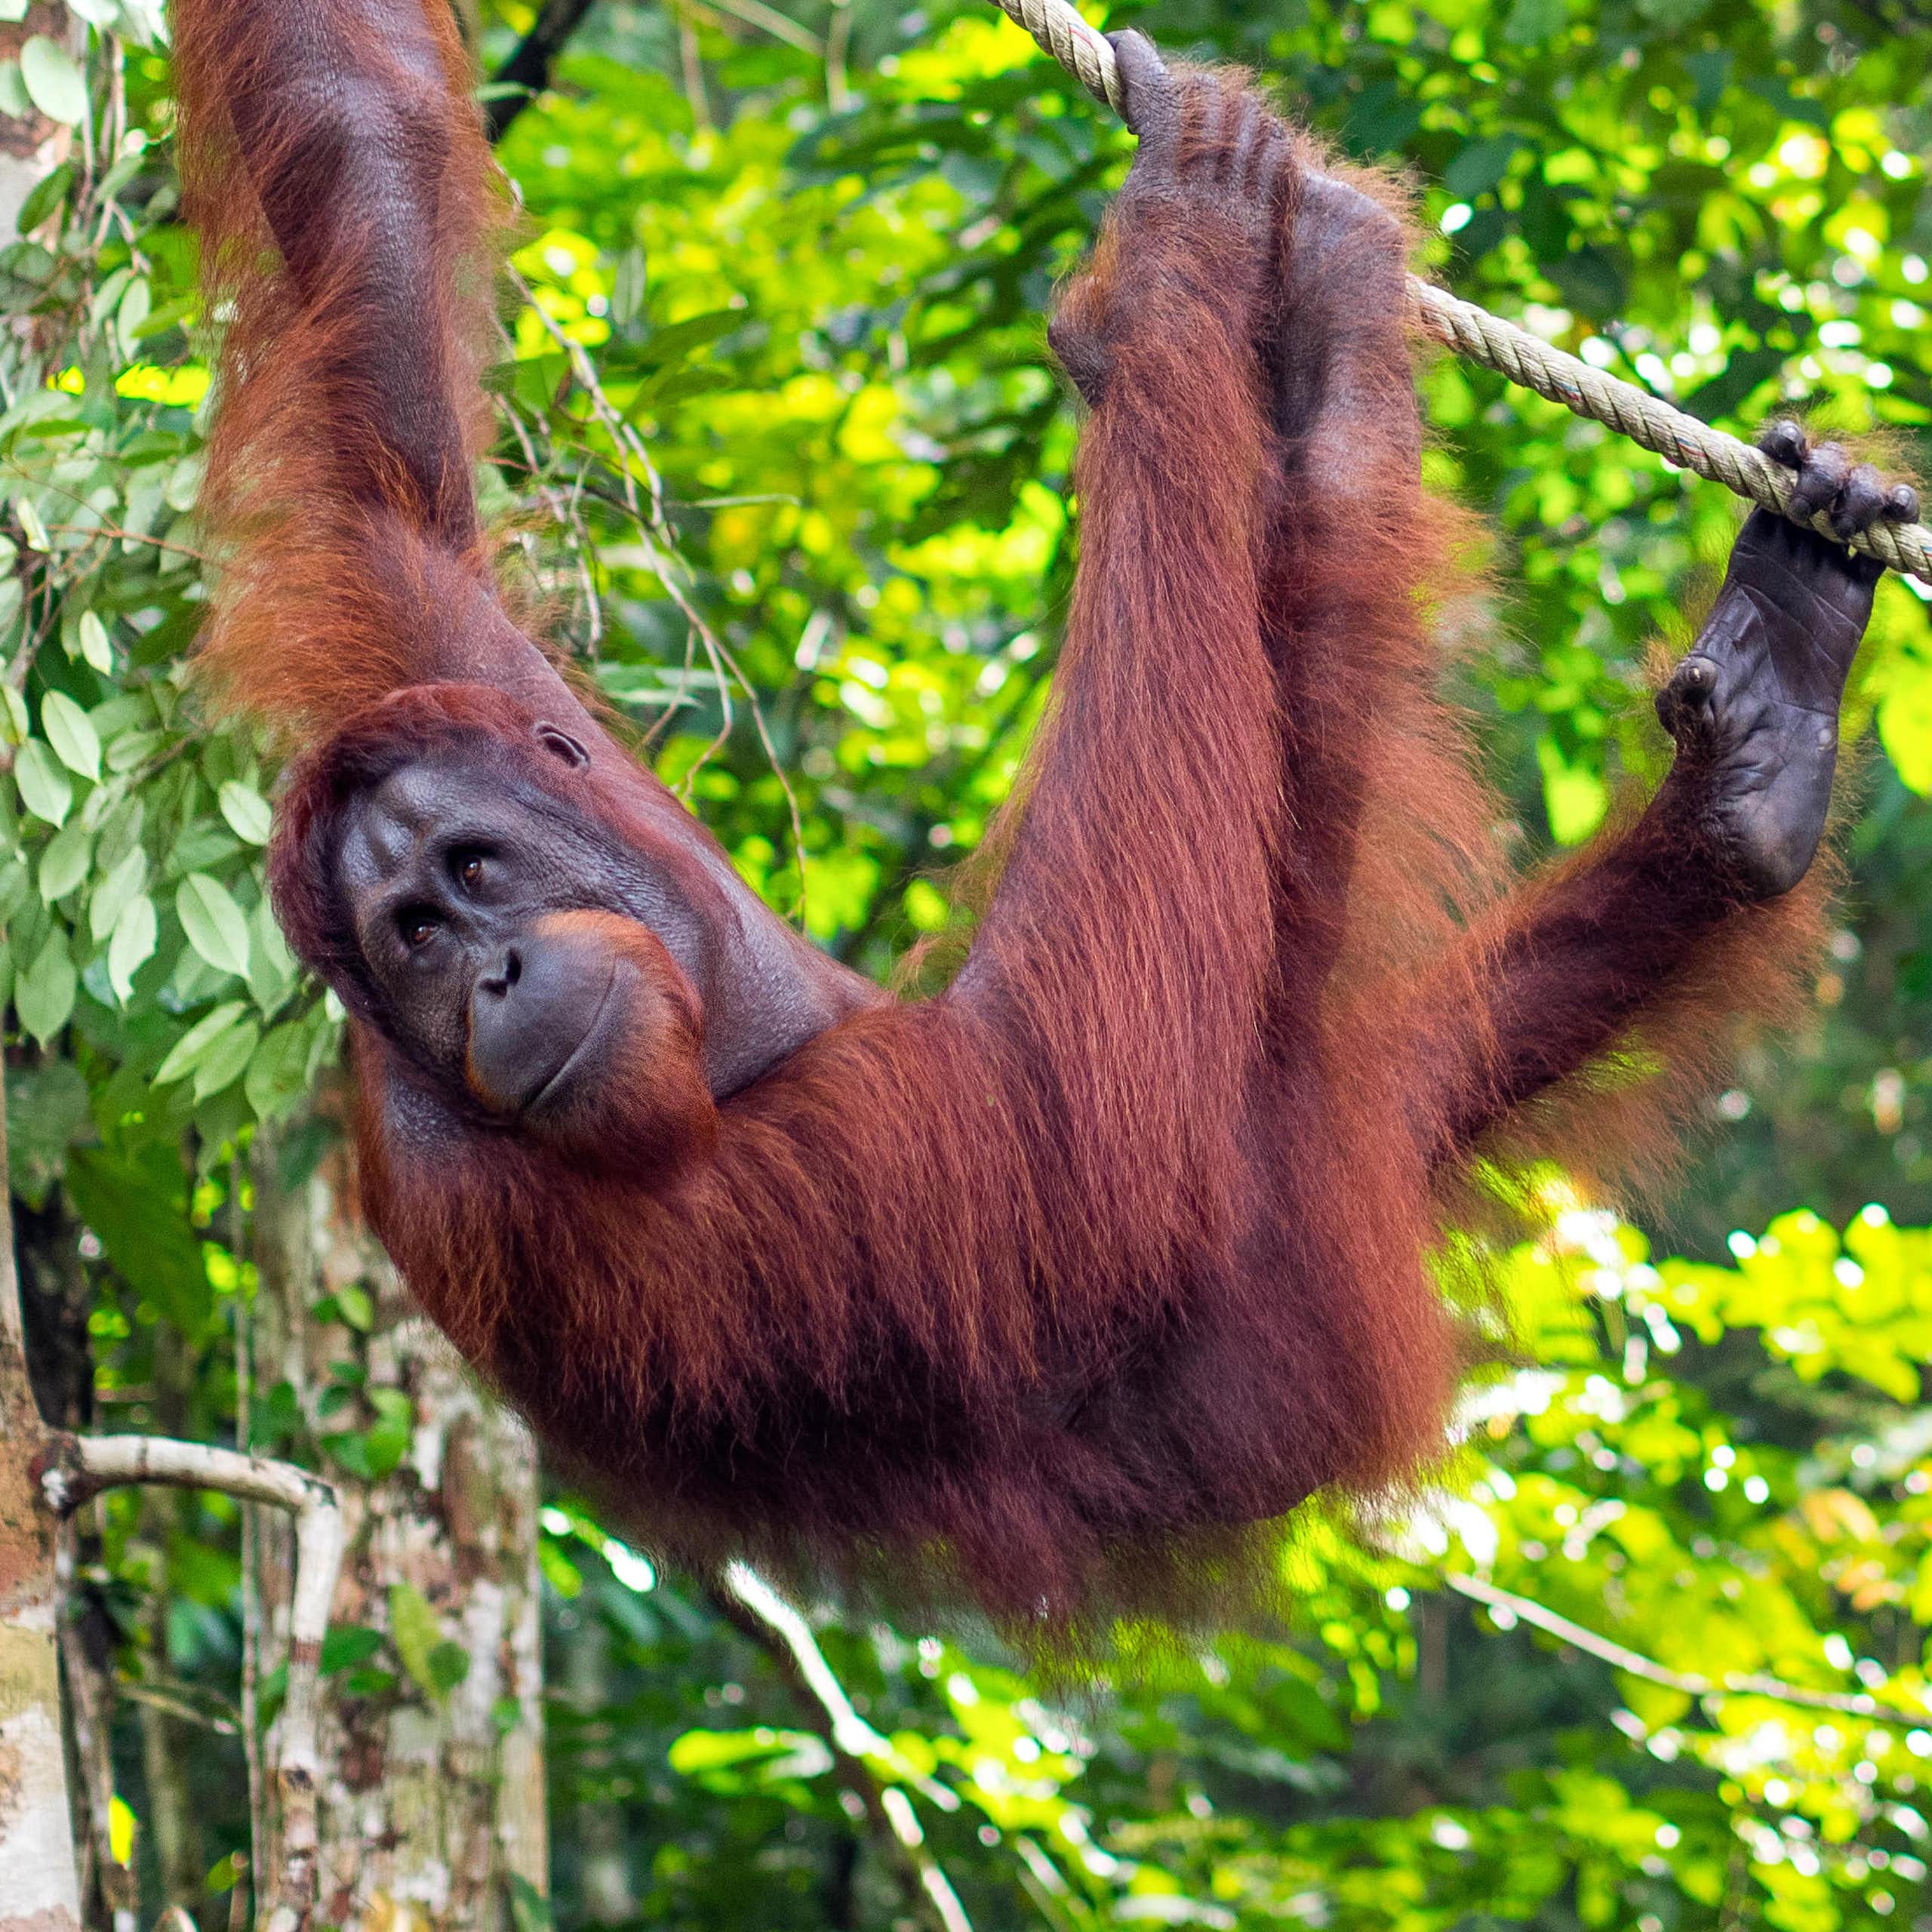 Orangutan diplomacy: why Malaysia’s scheme is attracting criticism before it starts